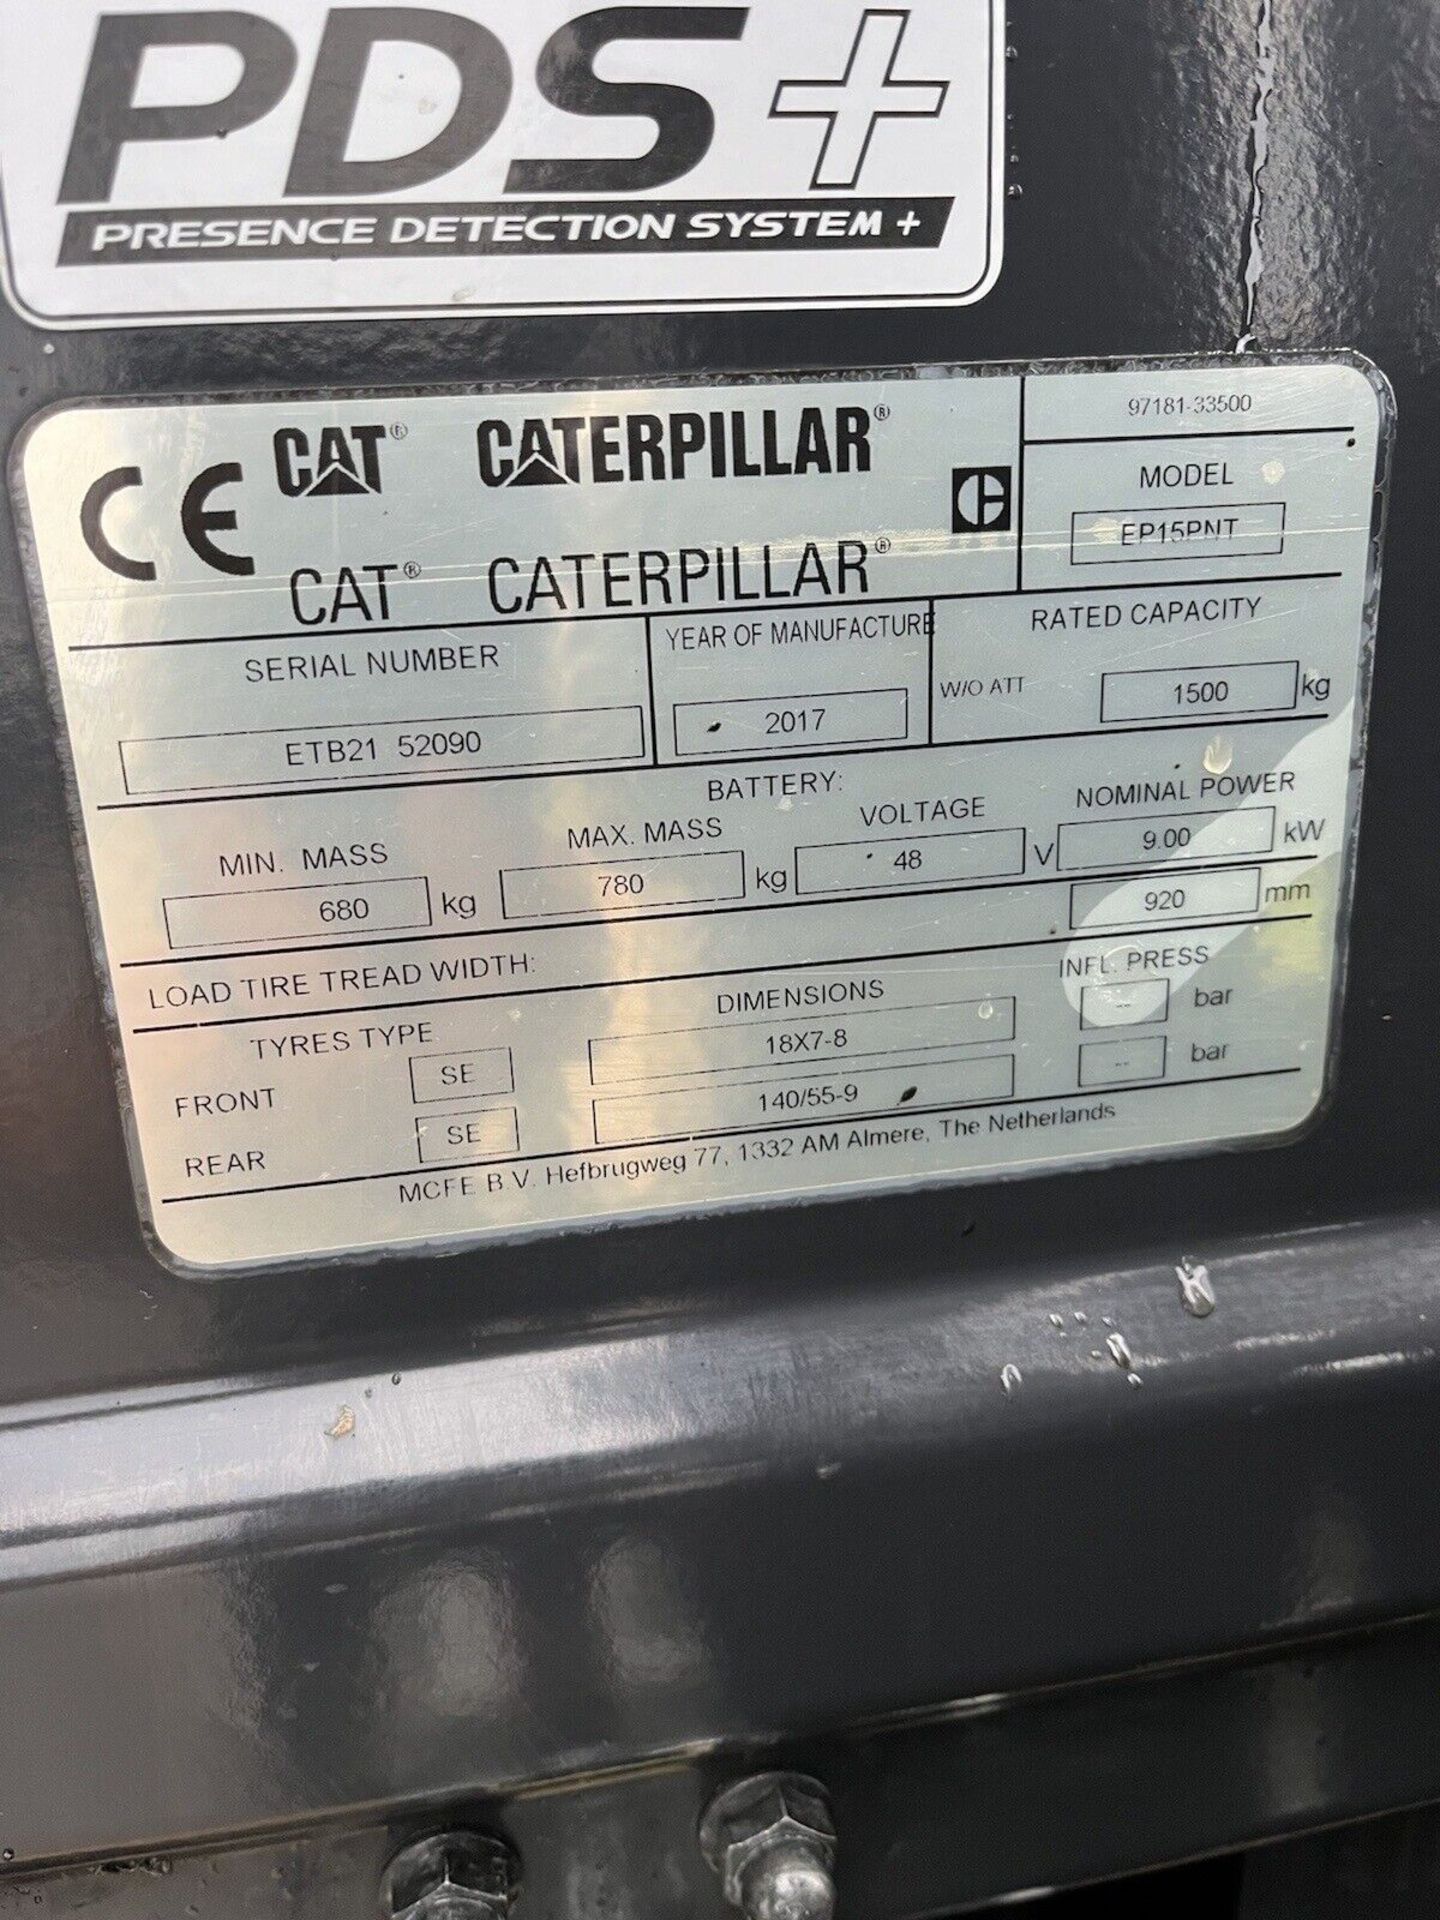 2017, CATERPILLAR 1.5 Electric Forklift Truck (Container Spec) - Image 3 of 6